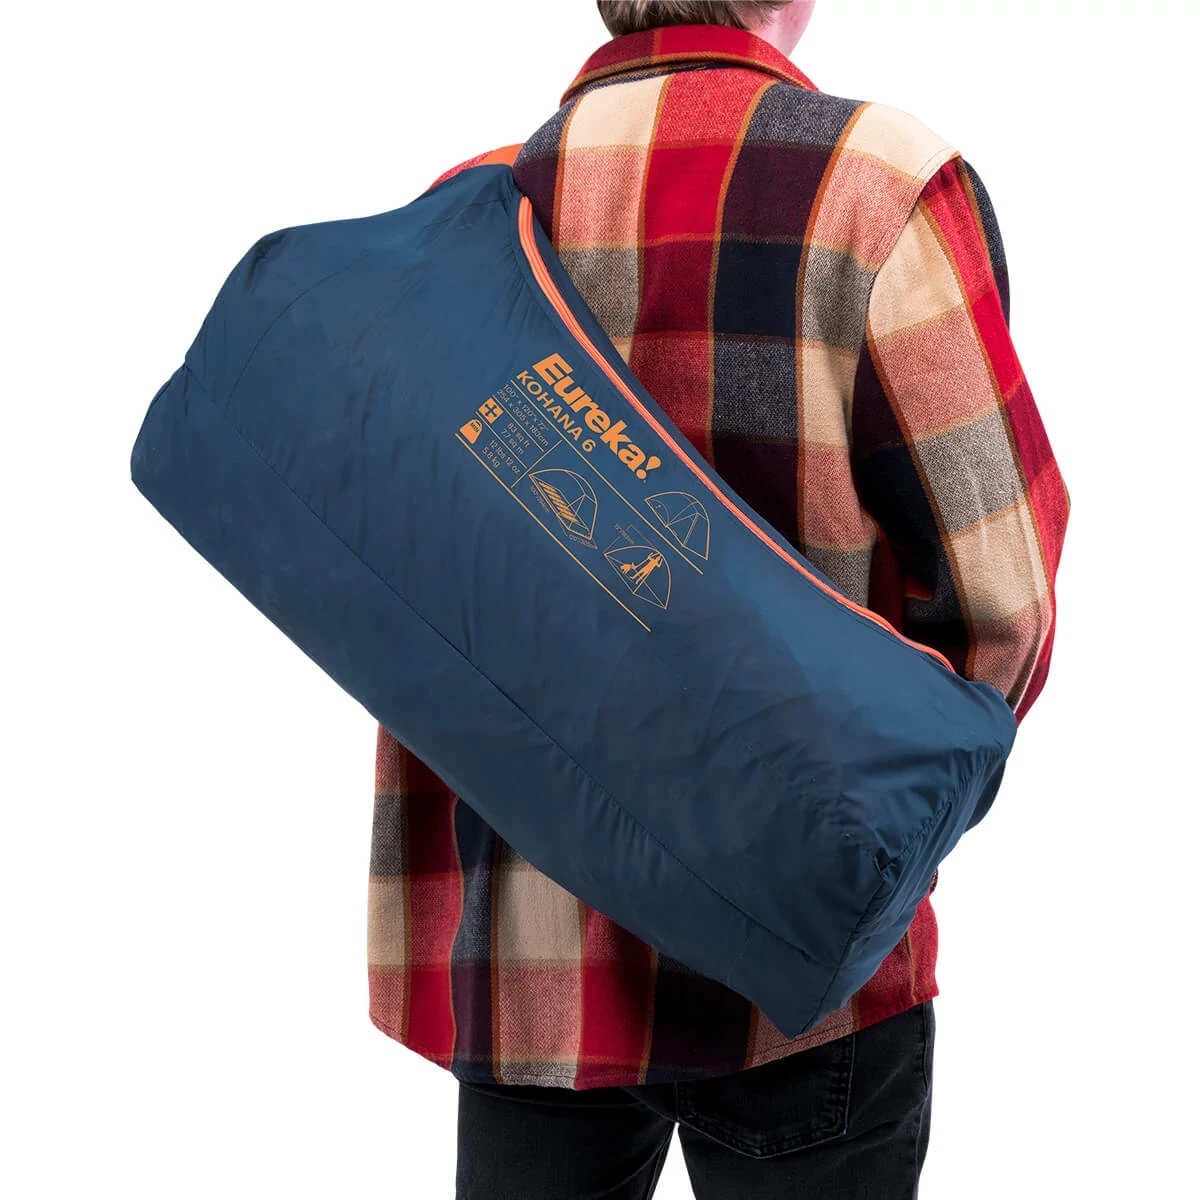 Person carrying packed Kohana 6 tent in carry bag